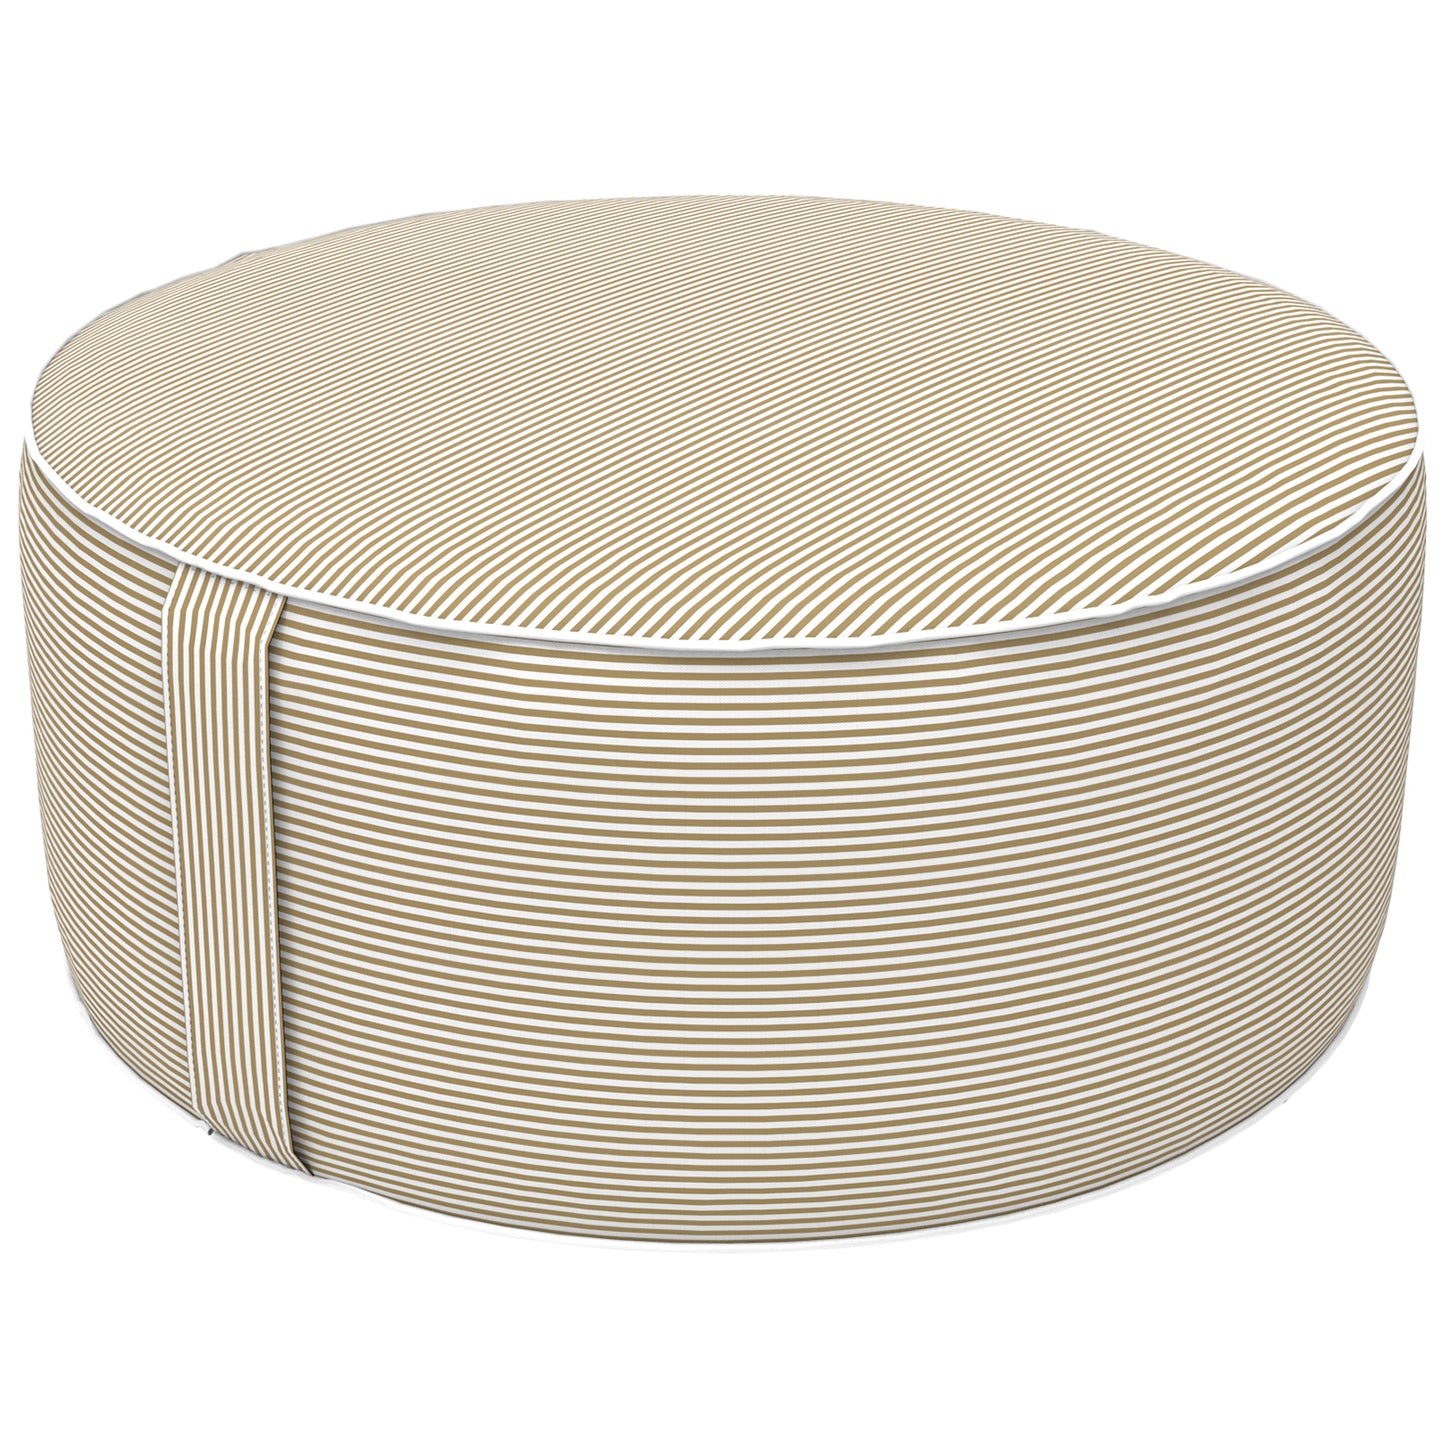 Outdoor Inflatable Stool Ottoman, All Weather Portable Footrest Stool, Furniture Stool Ottomans for Home Garden Beach, D31”xH14”, Stripe Beige